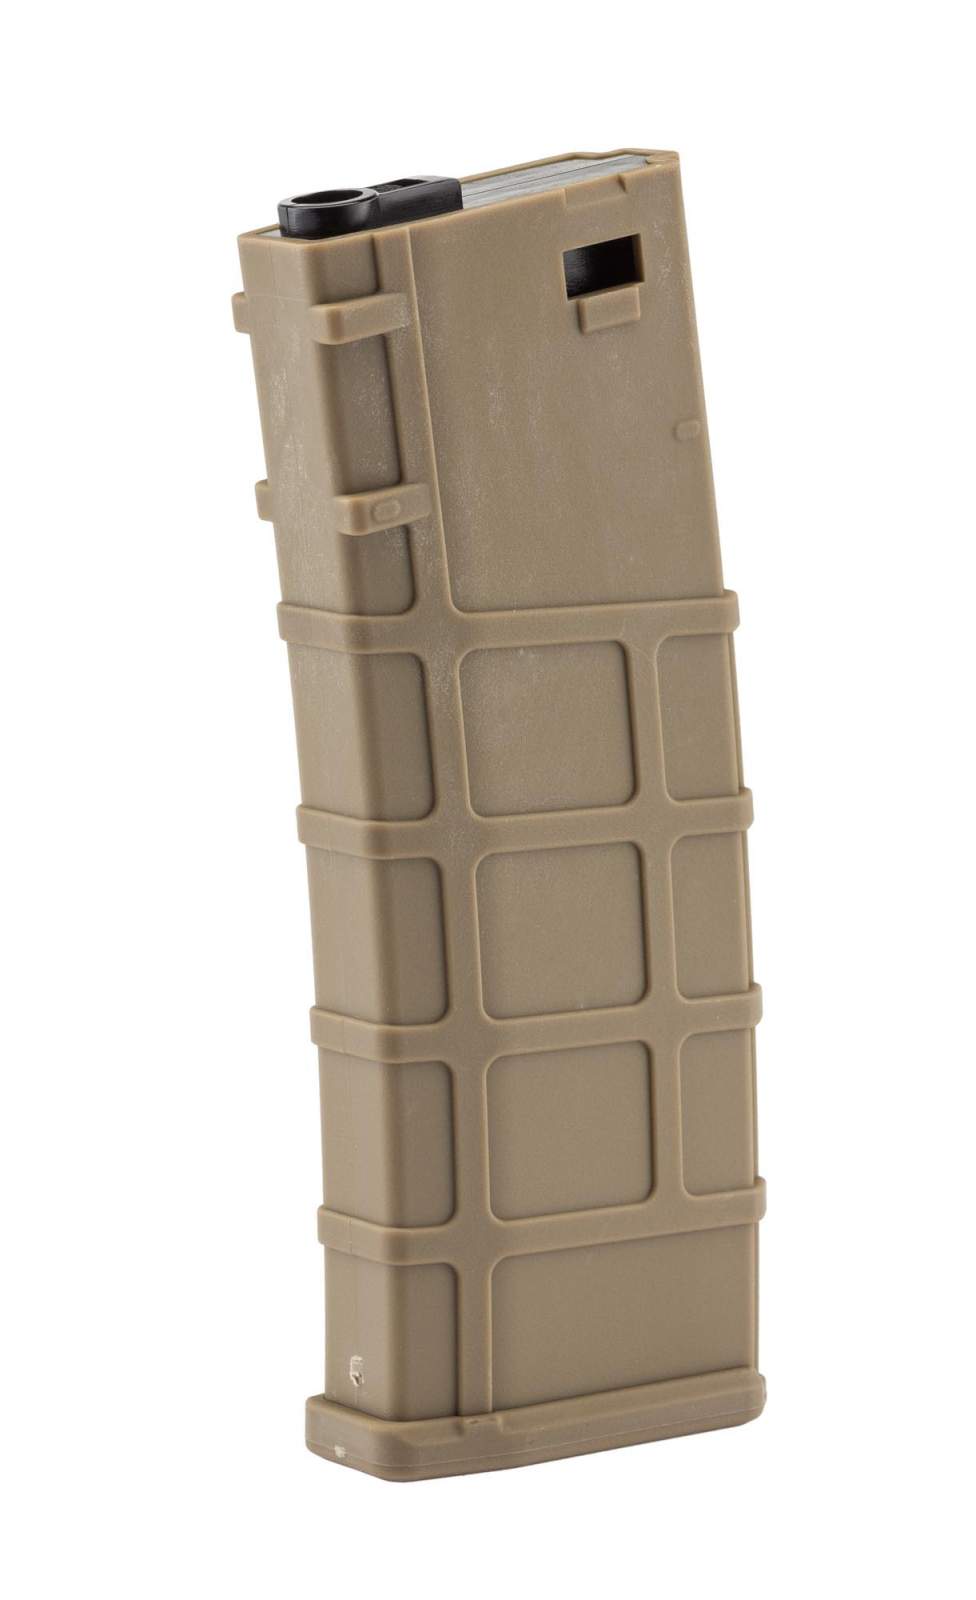 Photo Airsoft Magazine Real Cap 30 rds for M4 AEG Polymer Tan - Pack of 6 pcs